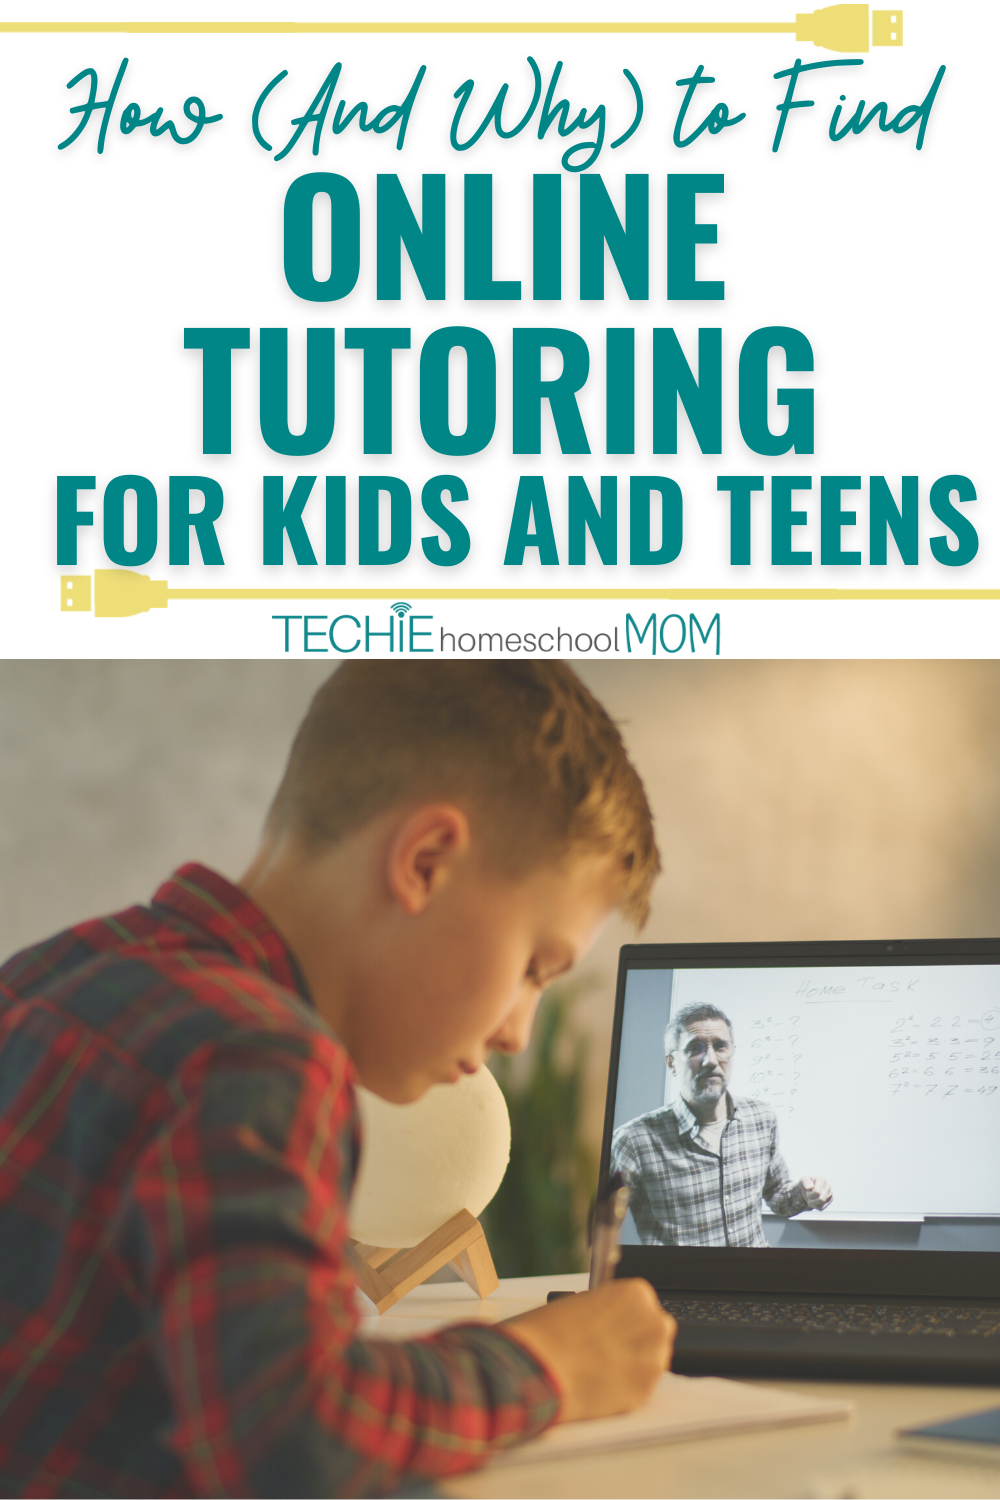 Oftentimes, a tutor sounds like a good idea. You'd be surprised how much just a few sessions can get your kids on track. Find out why using an online tutor is the way to go, plus get recommendations for the best online tutoring sites.